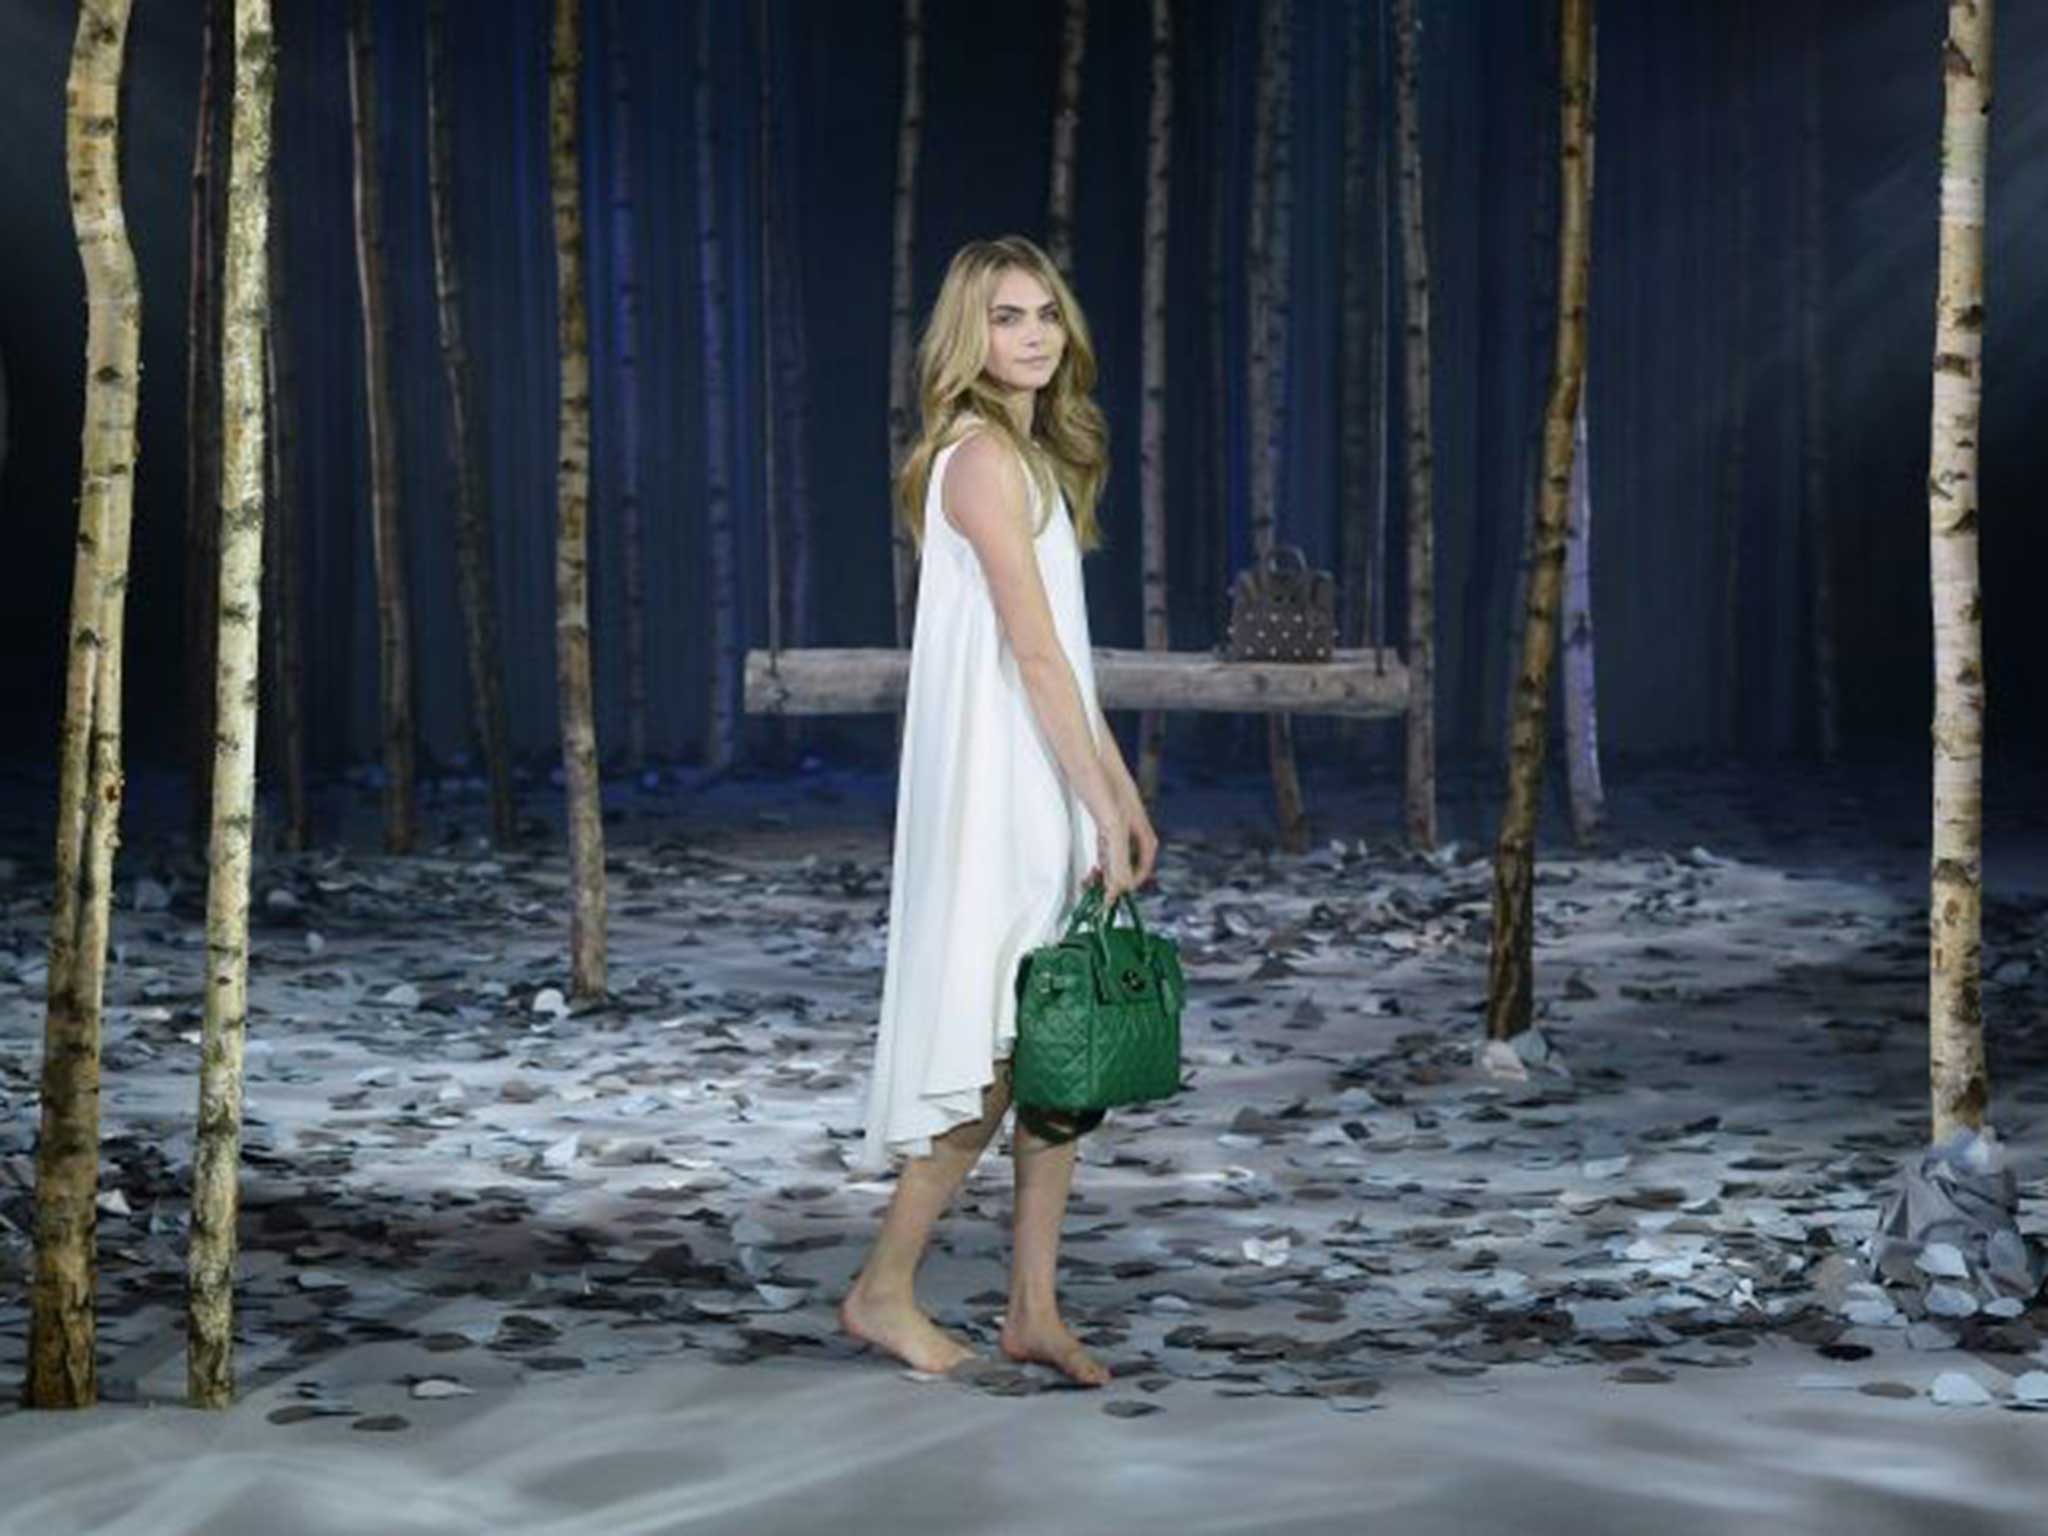 Mulberry can recover from a disappointing year